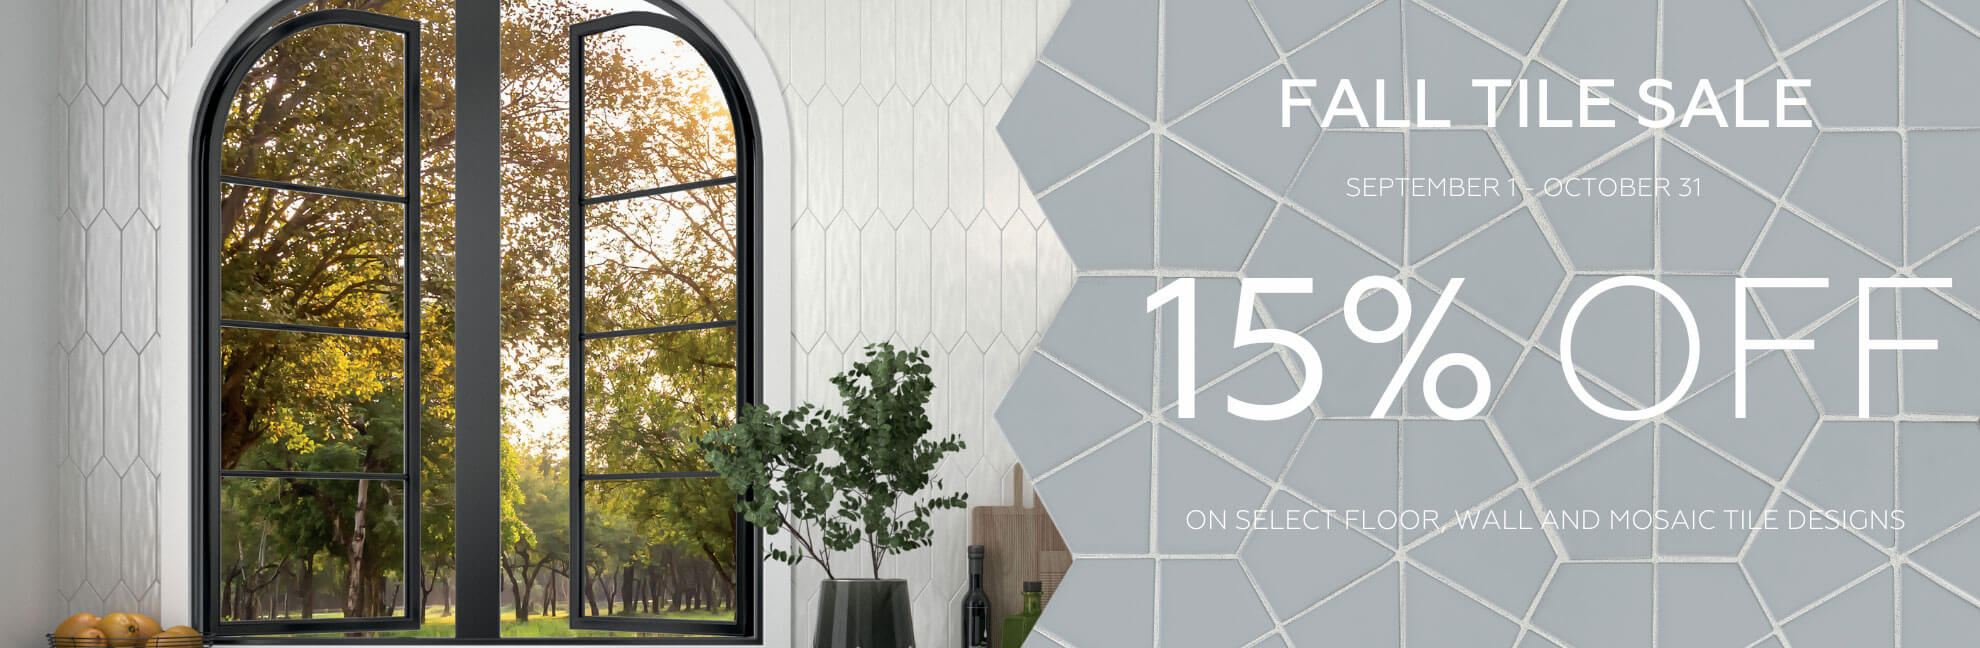 Fall Tile Sale - 15% off on select floor, wall and mosaic tile designs.